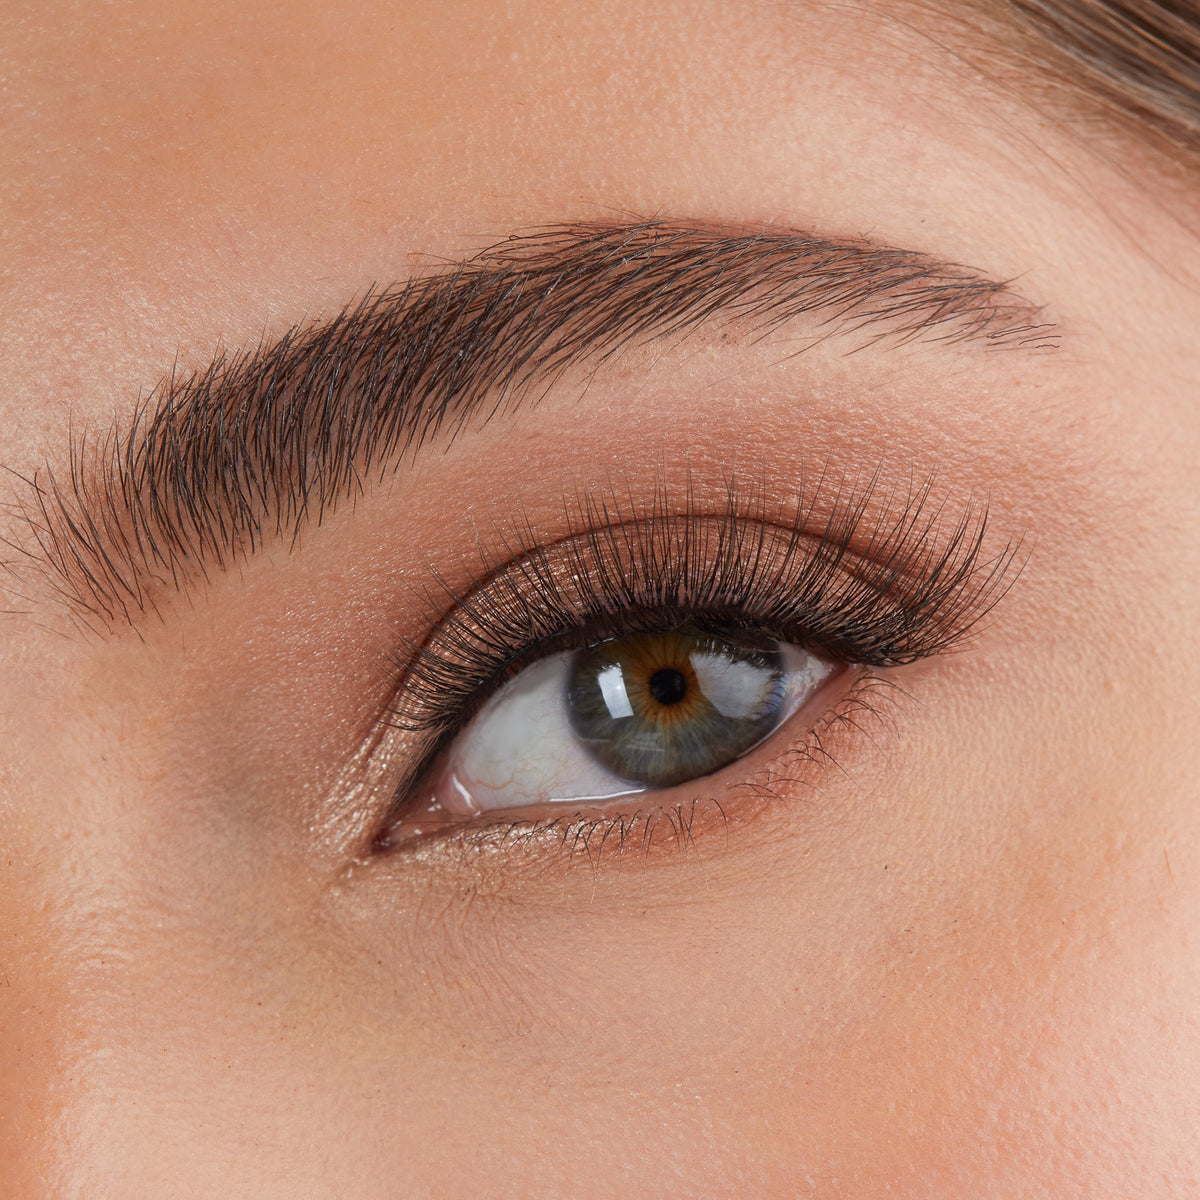 Lithe Lashes Core Collection lash style named 03 Everyday Winged, a close up eye thumbnail image of the model's eye wearing the false lashes for an up close perspective on how elegant the falsies look on the eye.